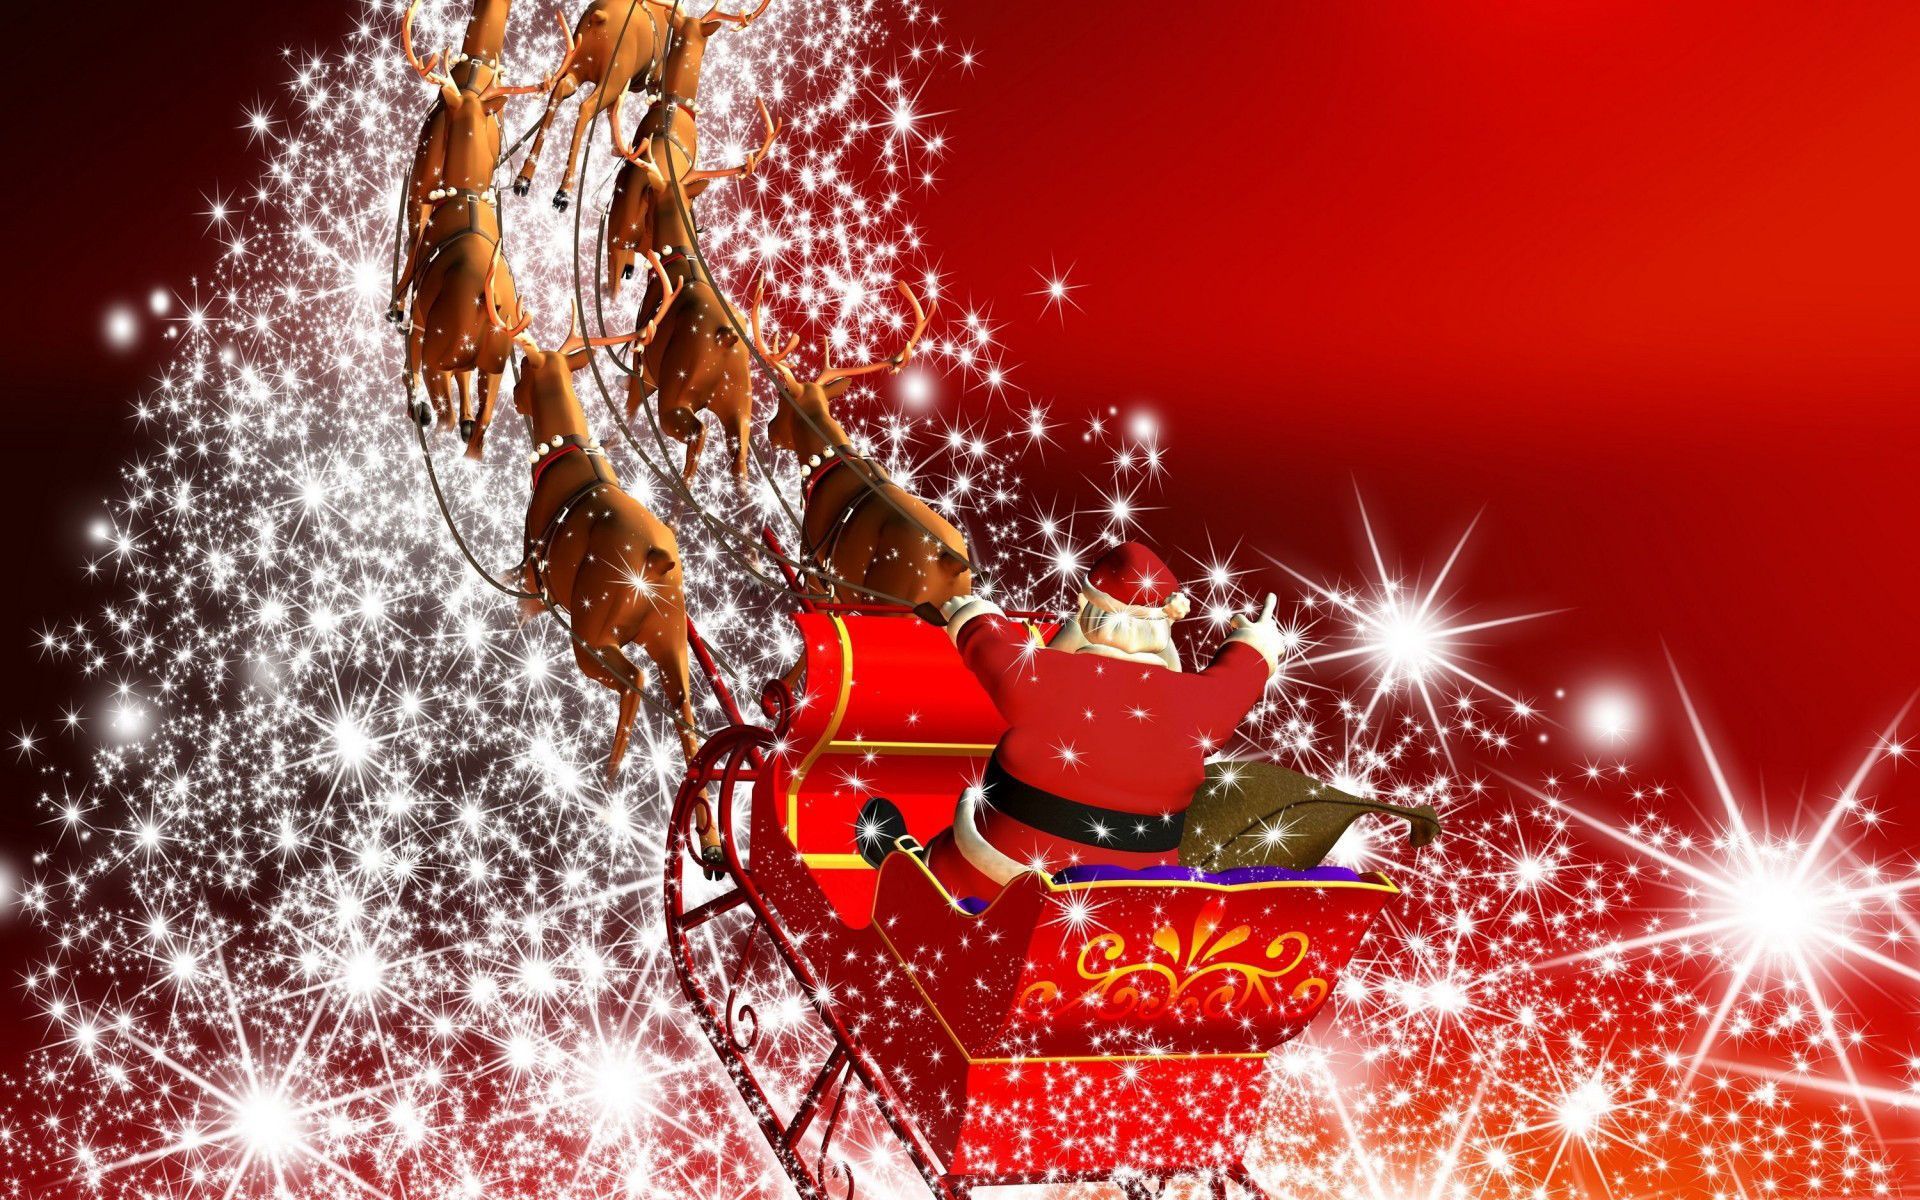 Free Christmas Wallpapers 2015 In HD - Daily Registrar - News ...